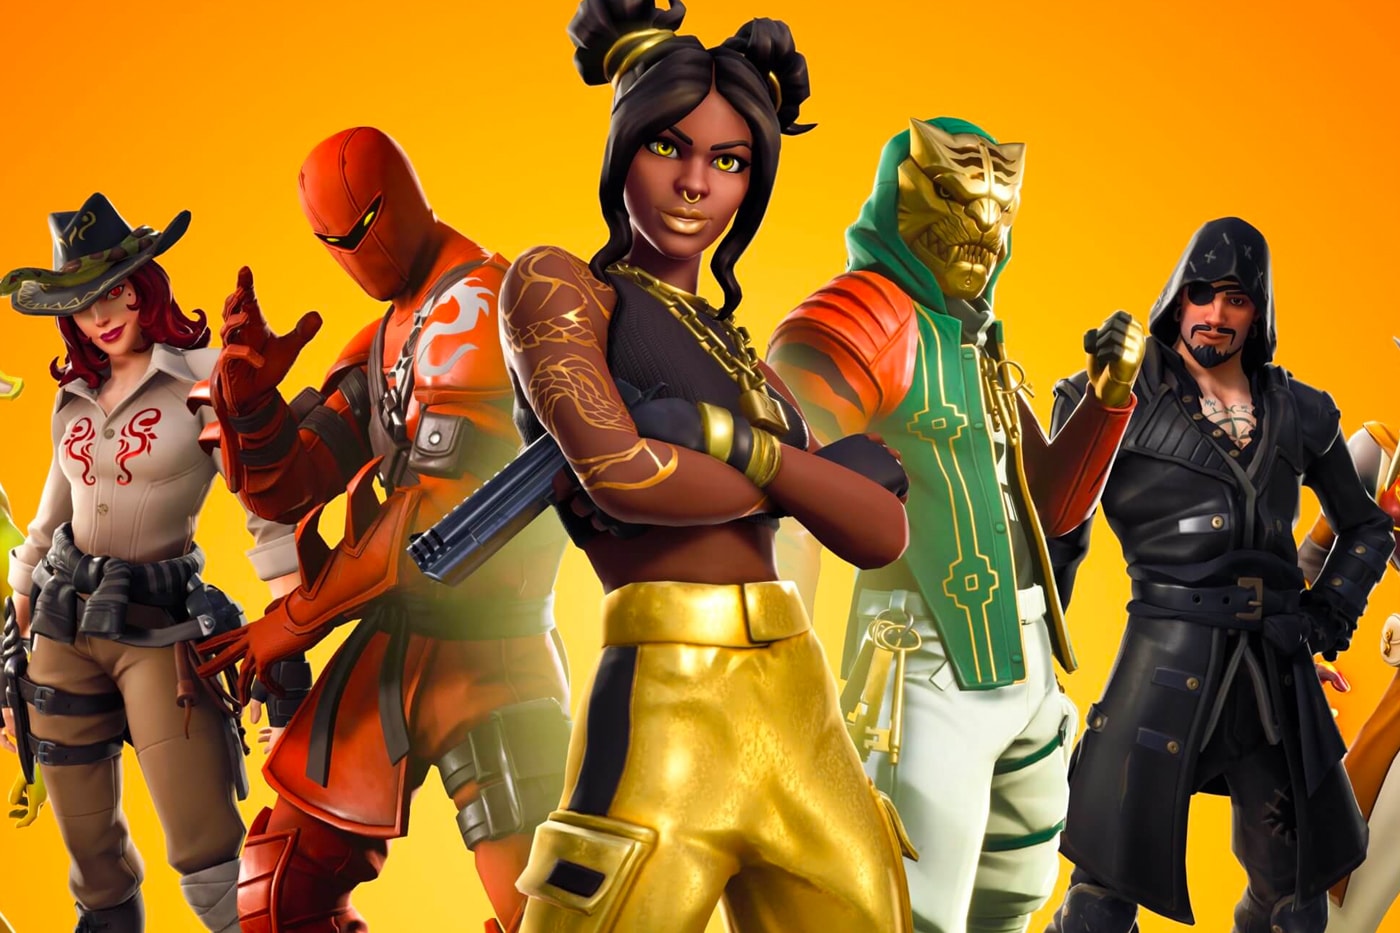 Epic Games Fortnite Federal Trade Commission FTC 245 million fine unwanted purchases unauthorized charges 